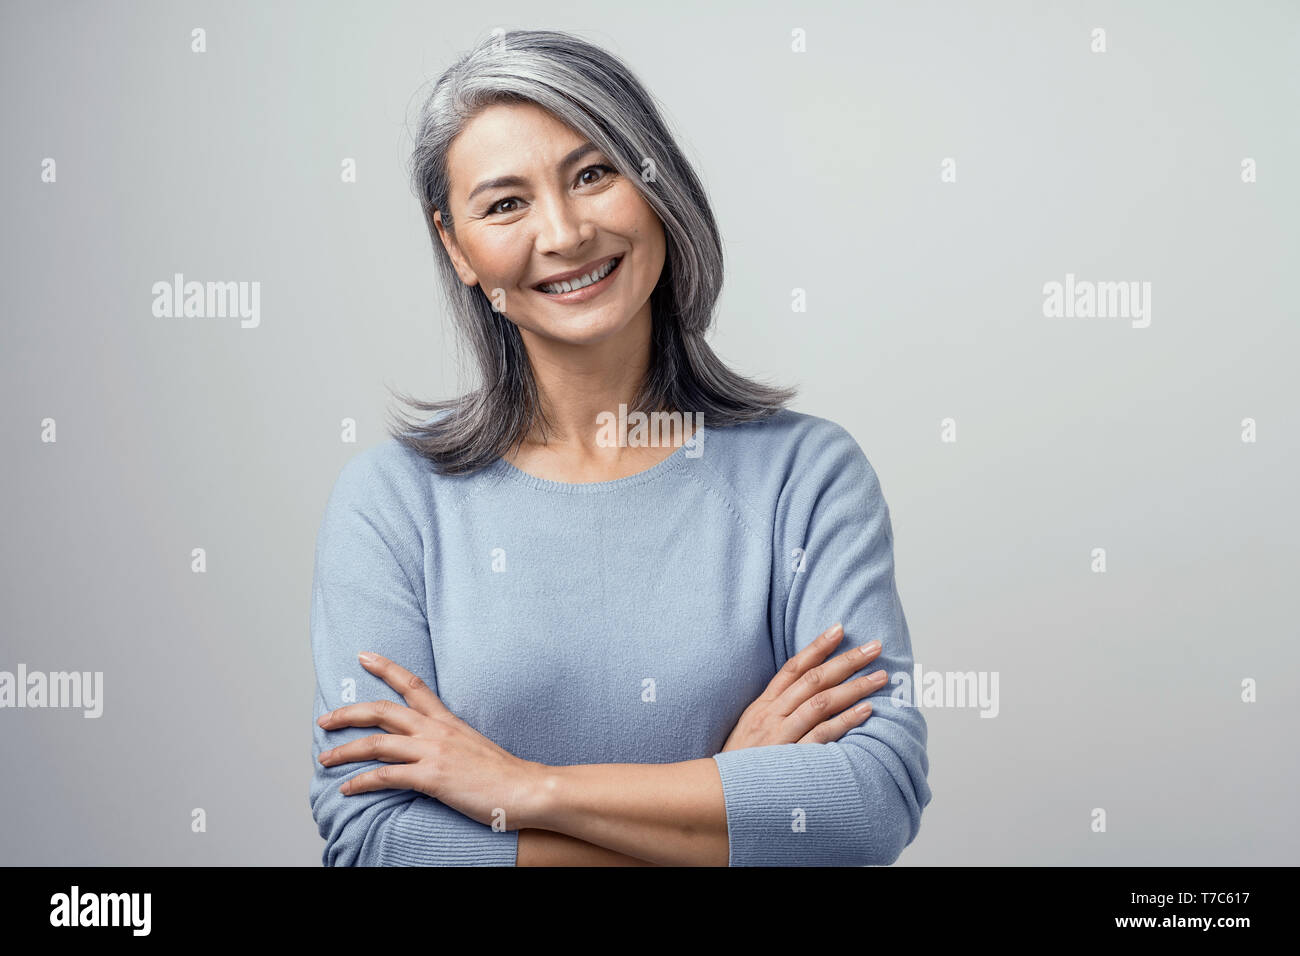 Attractive Optimistic Grey-Haired Mature Asian Woman Smiles Widely In Studio and Crosses Her Hands, Head Tilted. Hands and Shoulders Tonned Portrait O Stock Photo